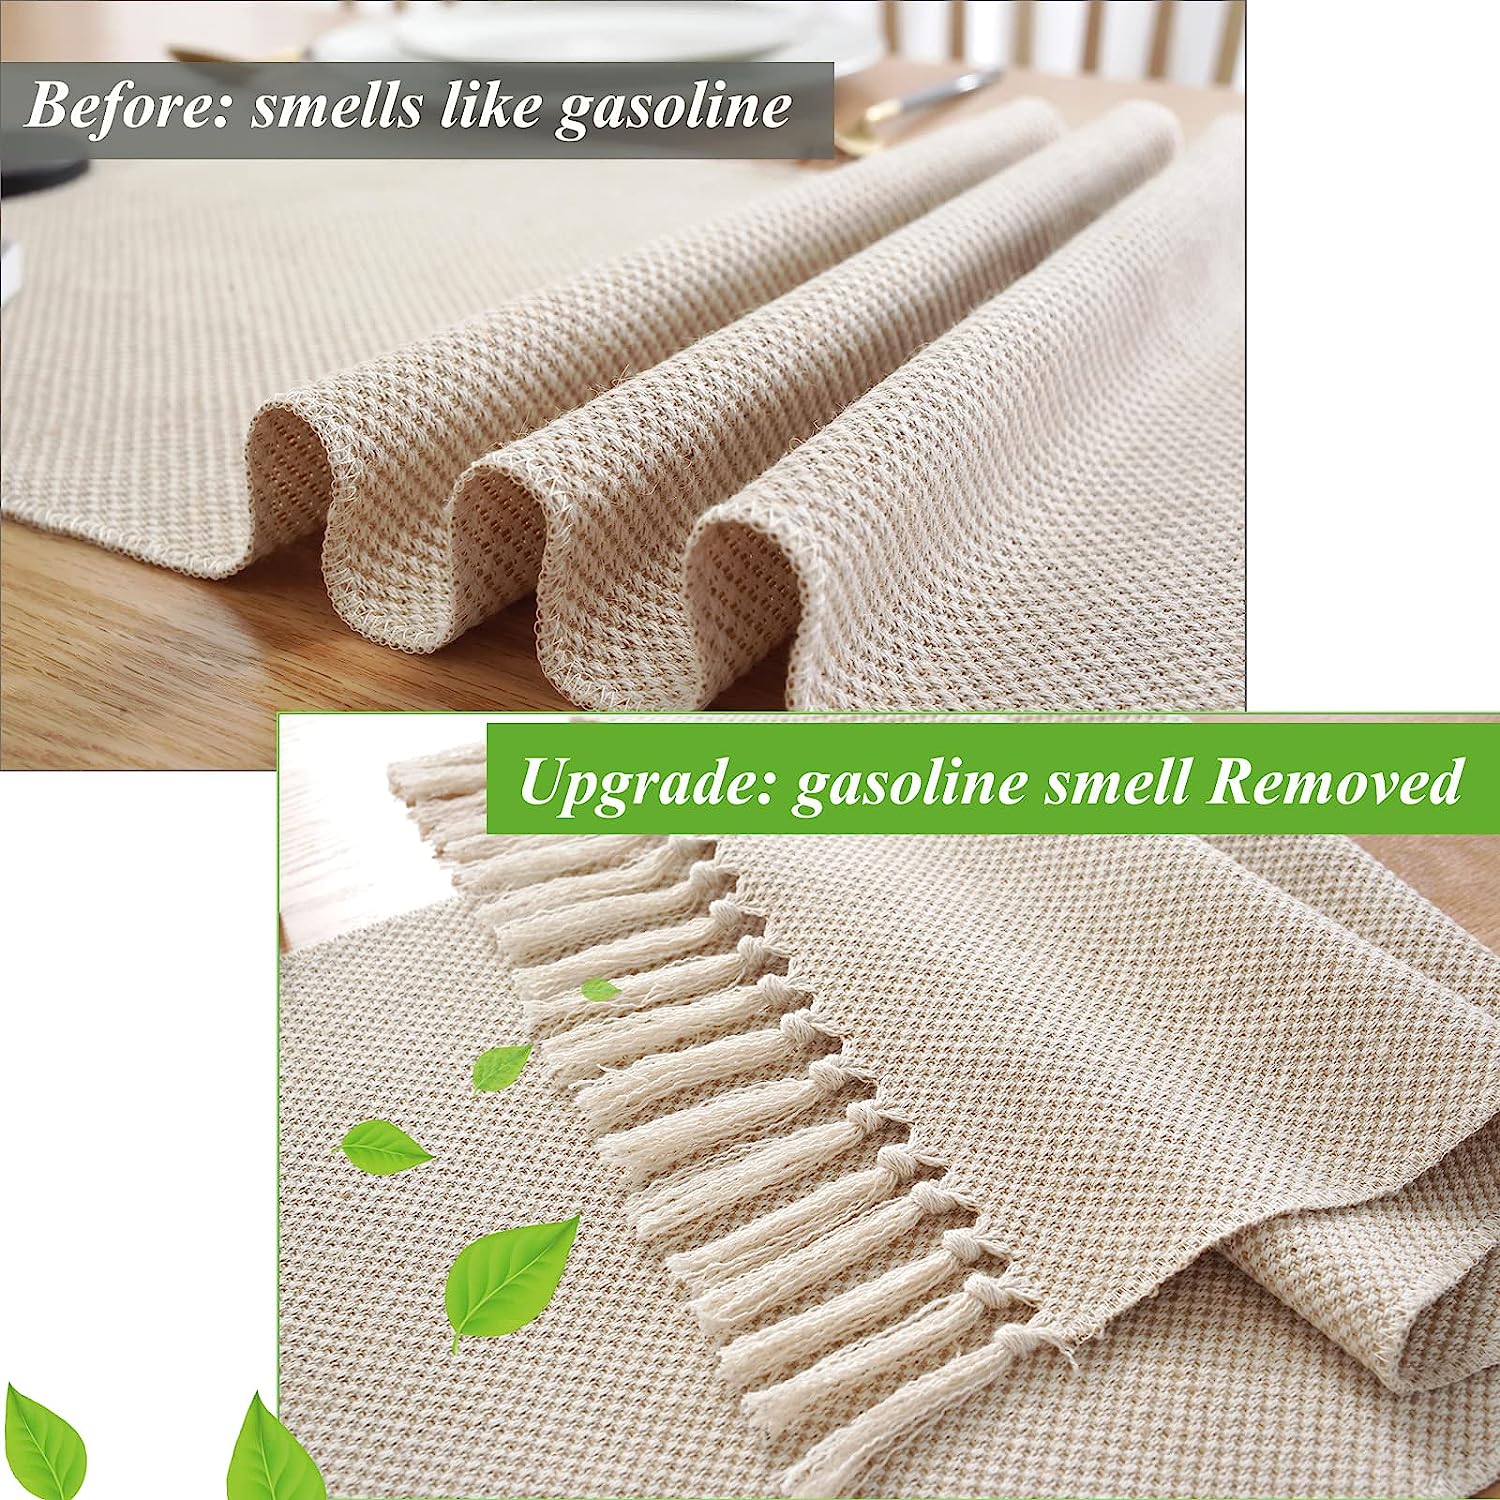 Wracra Cotton Hessian Table Runner Braided Farmhouse Style Jute Table Runner 180cm Long for Holiday Parties and Everyday Use(Waffle, 180cm) 3